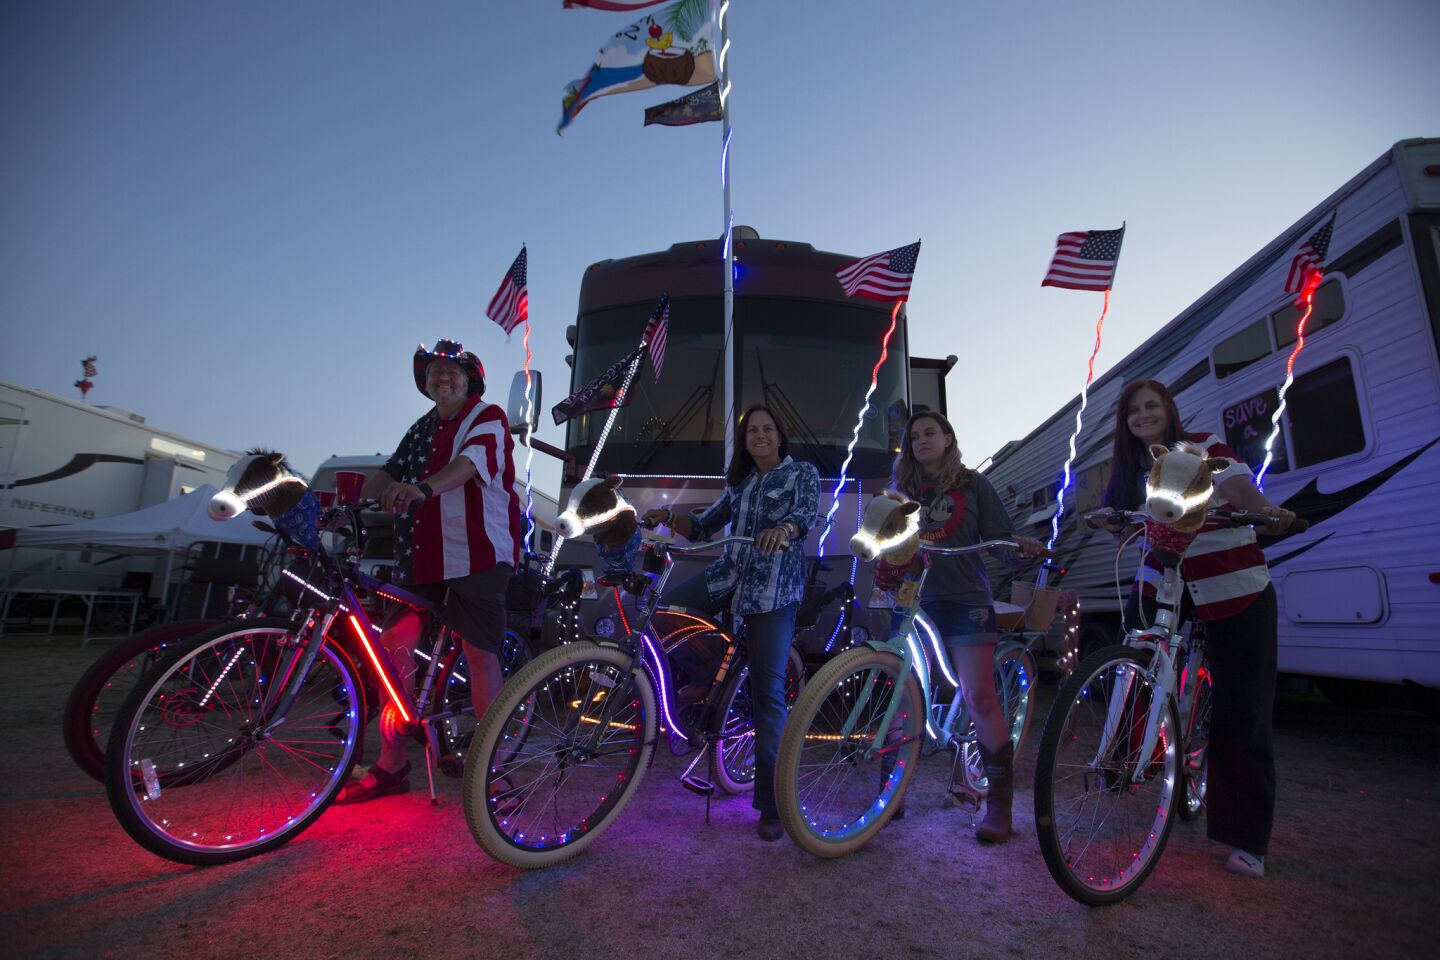 Country music fans, from left, Vito Pace, Linda Vogel, Cassidy Vogel, Michelle Pace, all of Calabasas, sport LED lights on their bikes at dusk in the RV Resort for the 10th anniversary of the Stagecoach Country Music Festival at the Empire Polo Club in Indio.